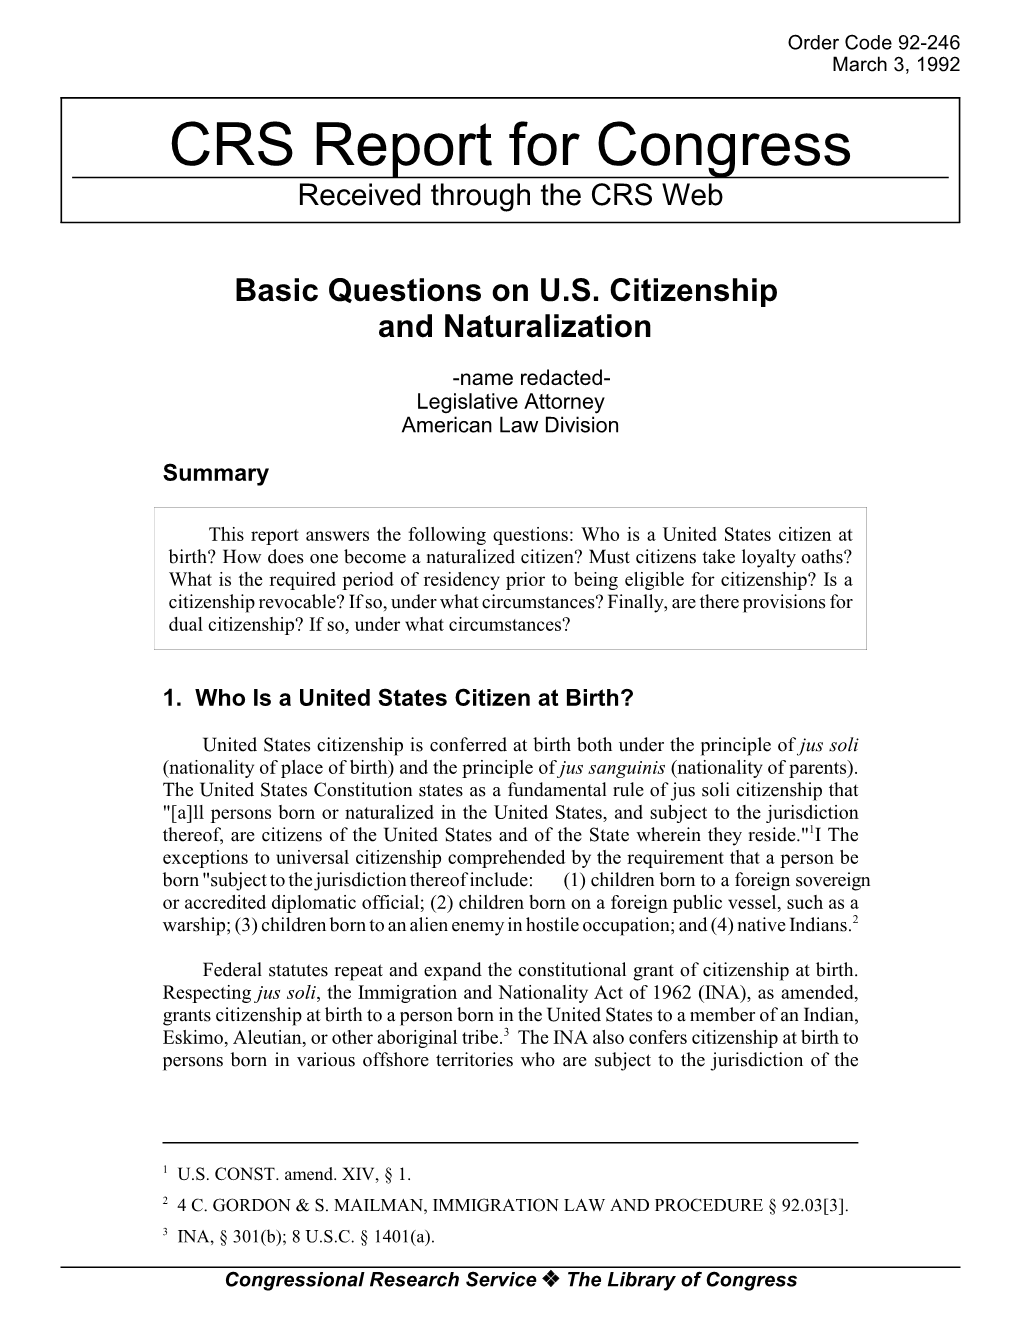 Basic Questions on U.S. Citizenship and Naturalization